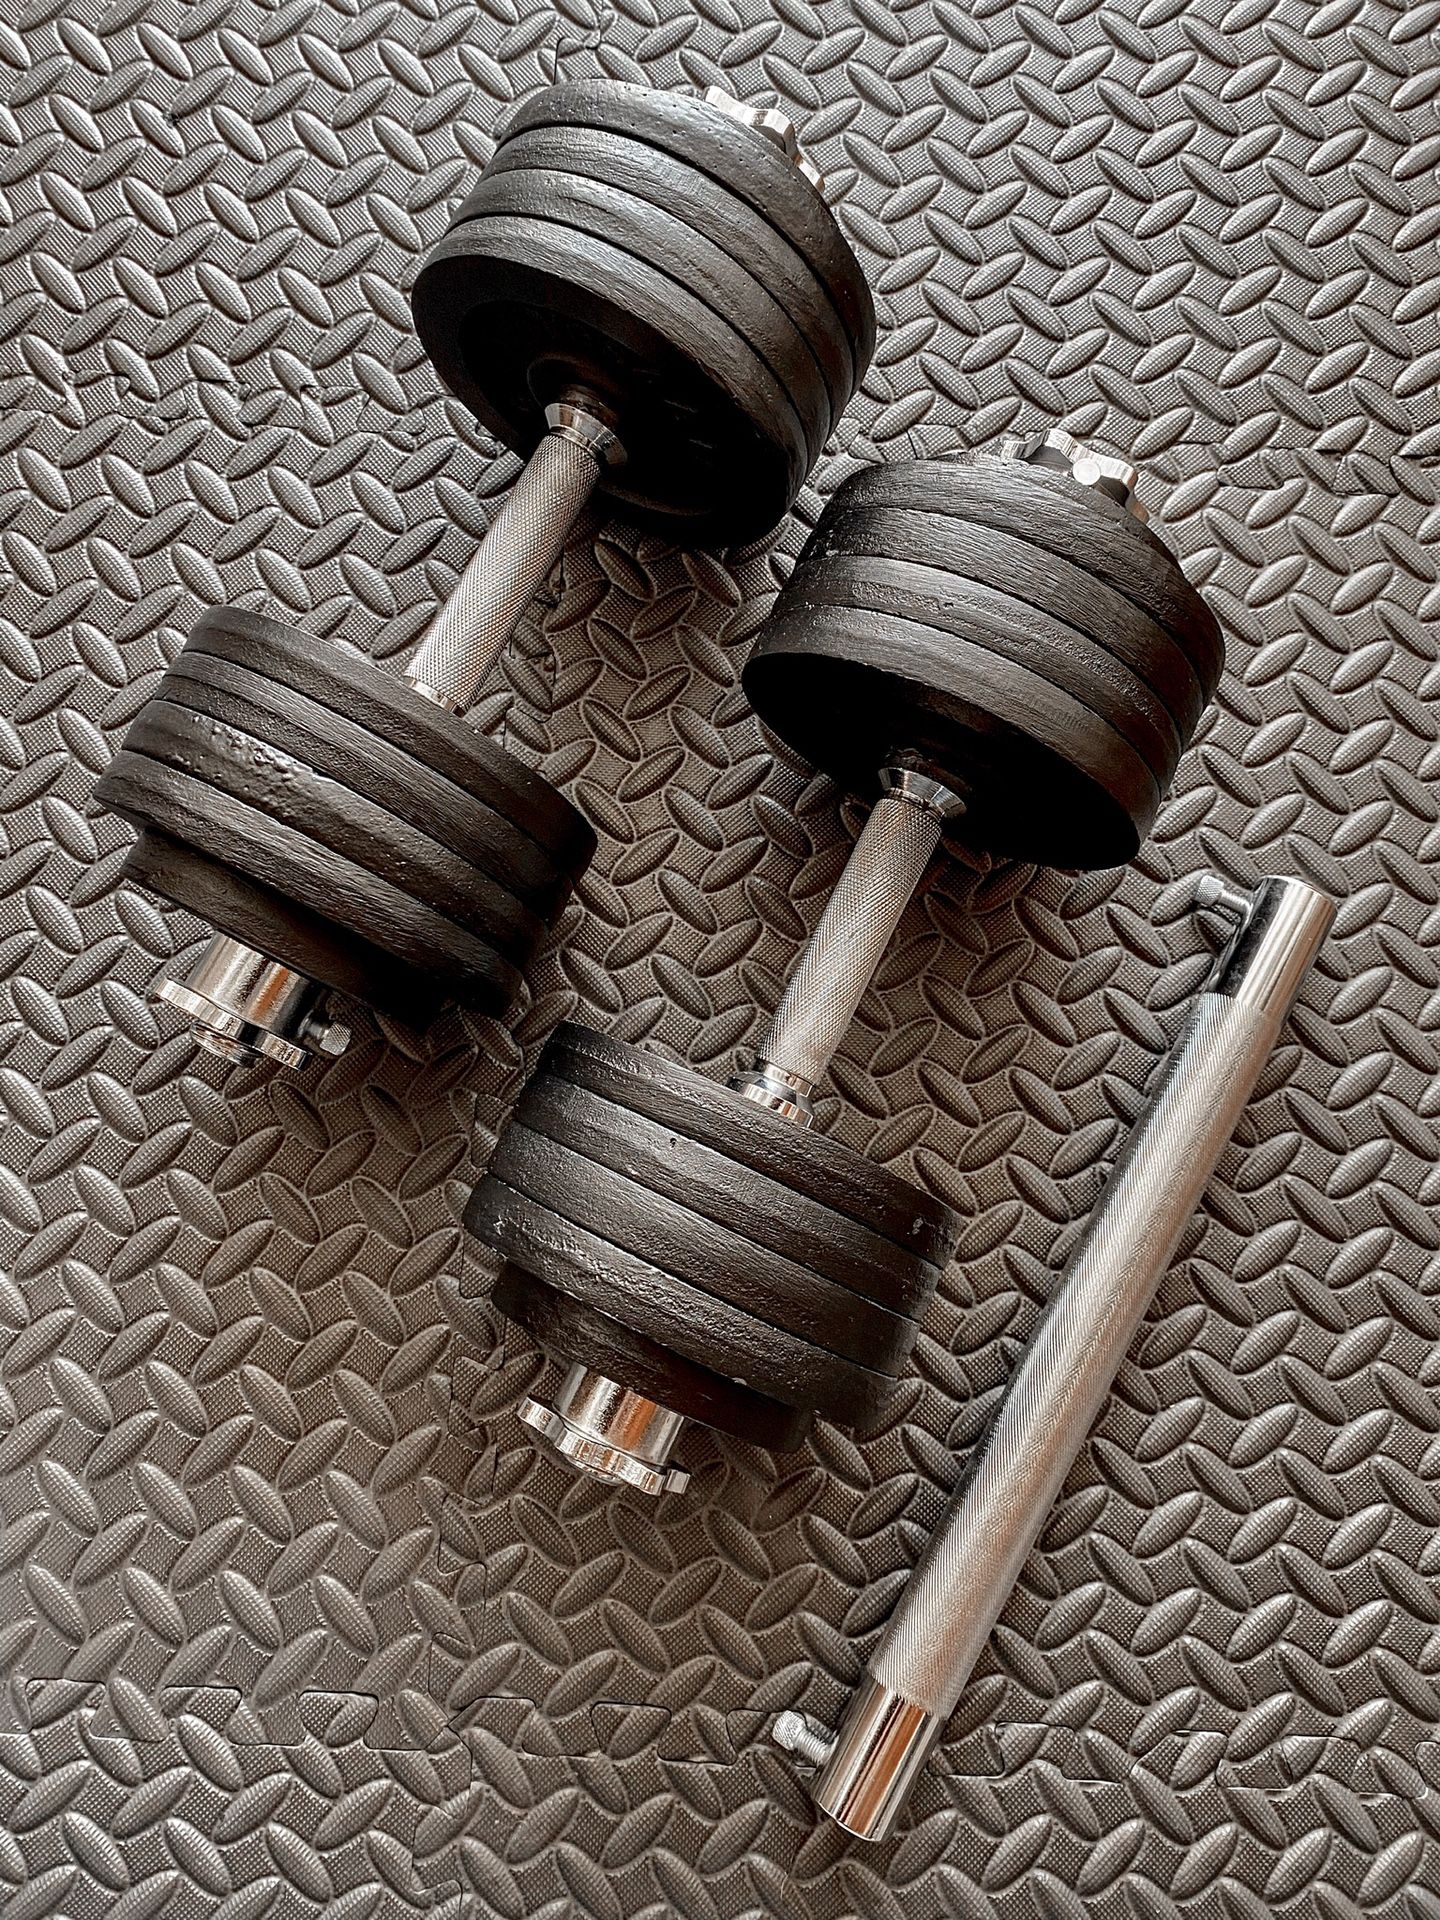 Brand new in box 105 lb (52.5x2) pair adjustable dumbbells with bar barbell attachment (not negotiable)